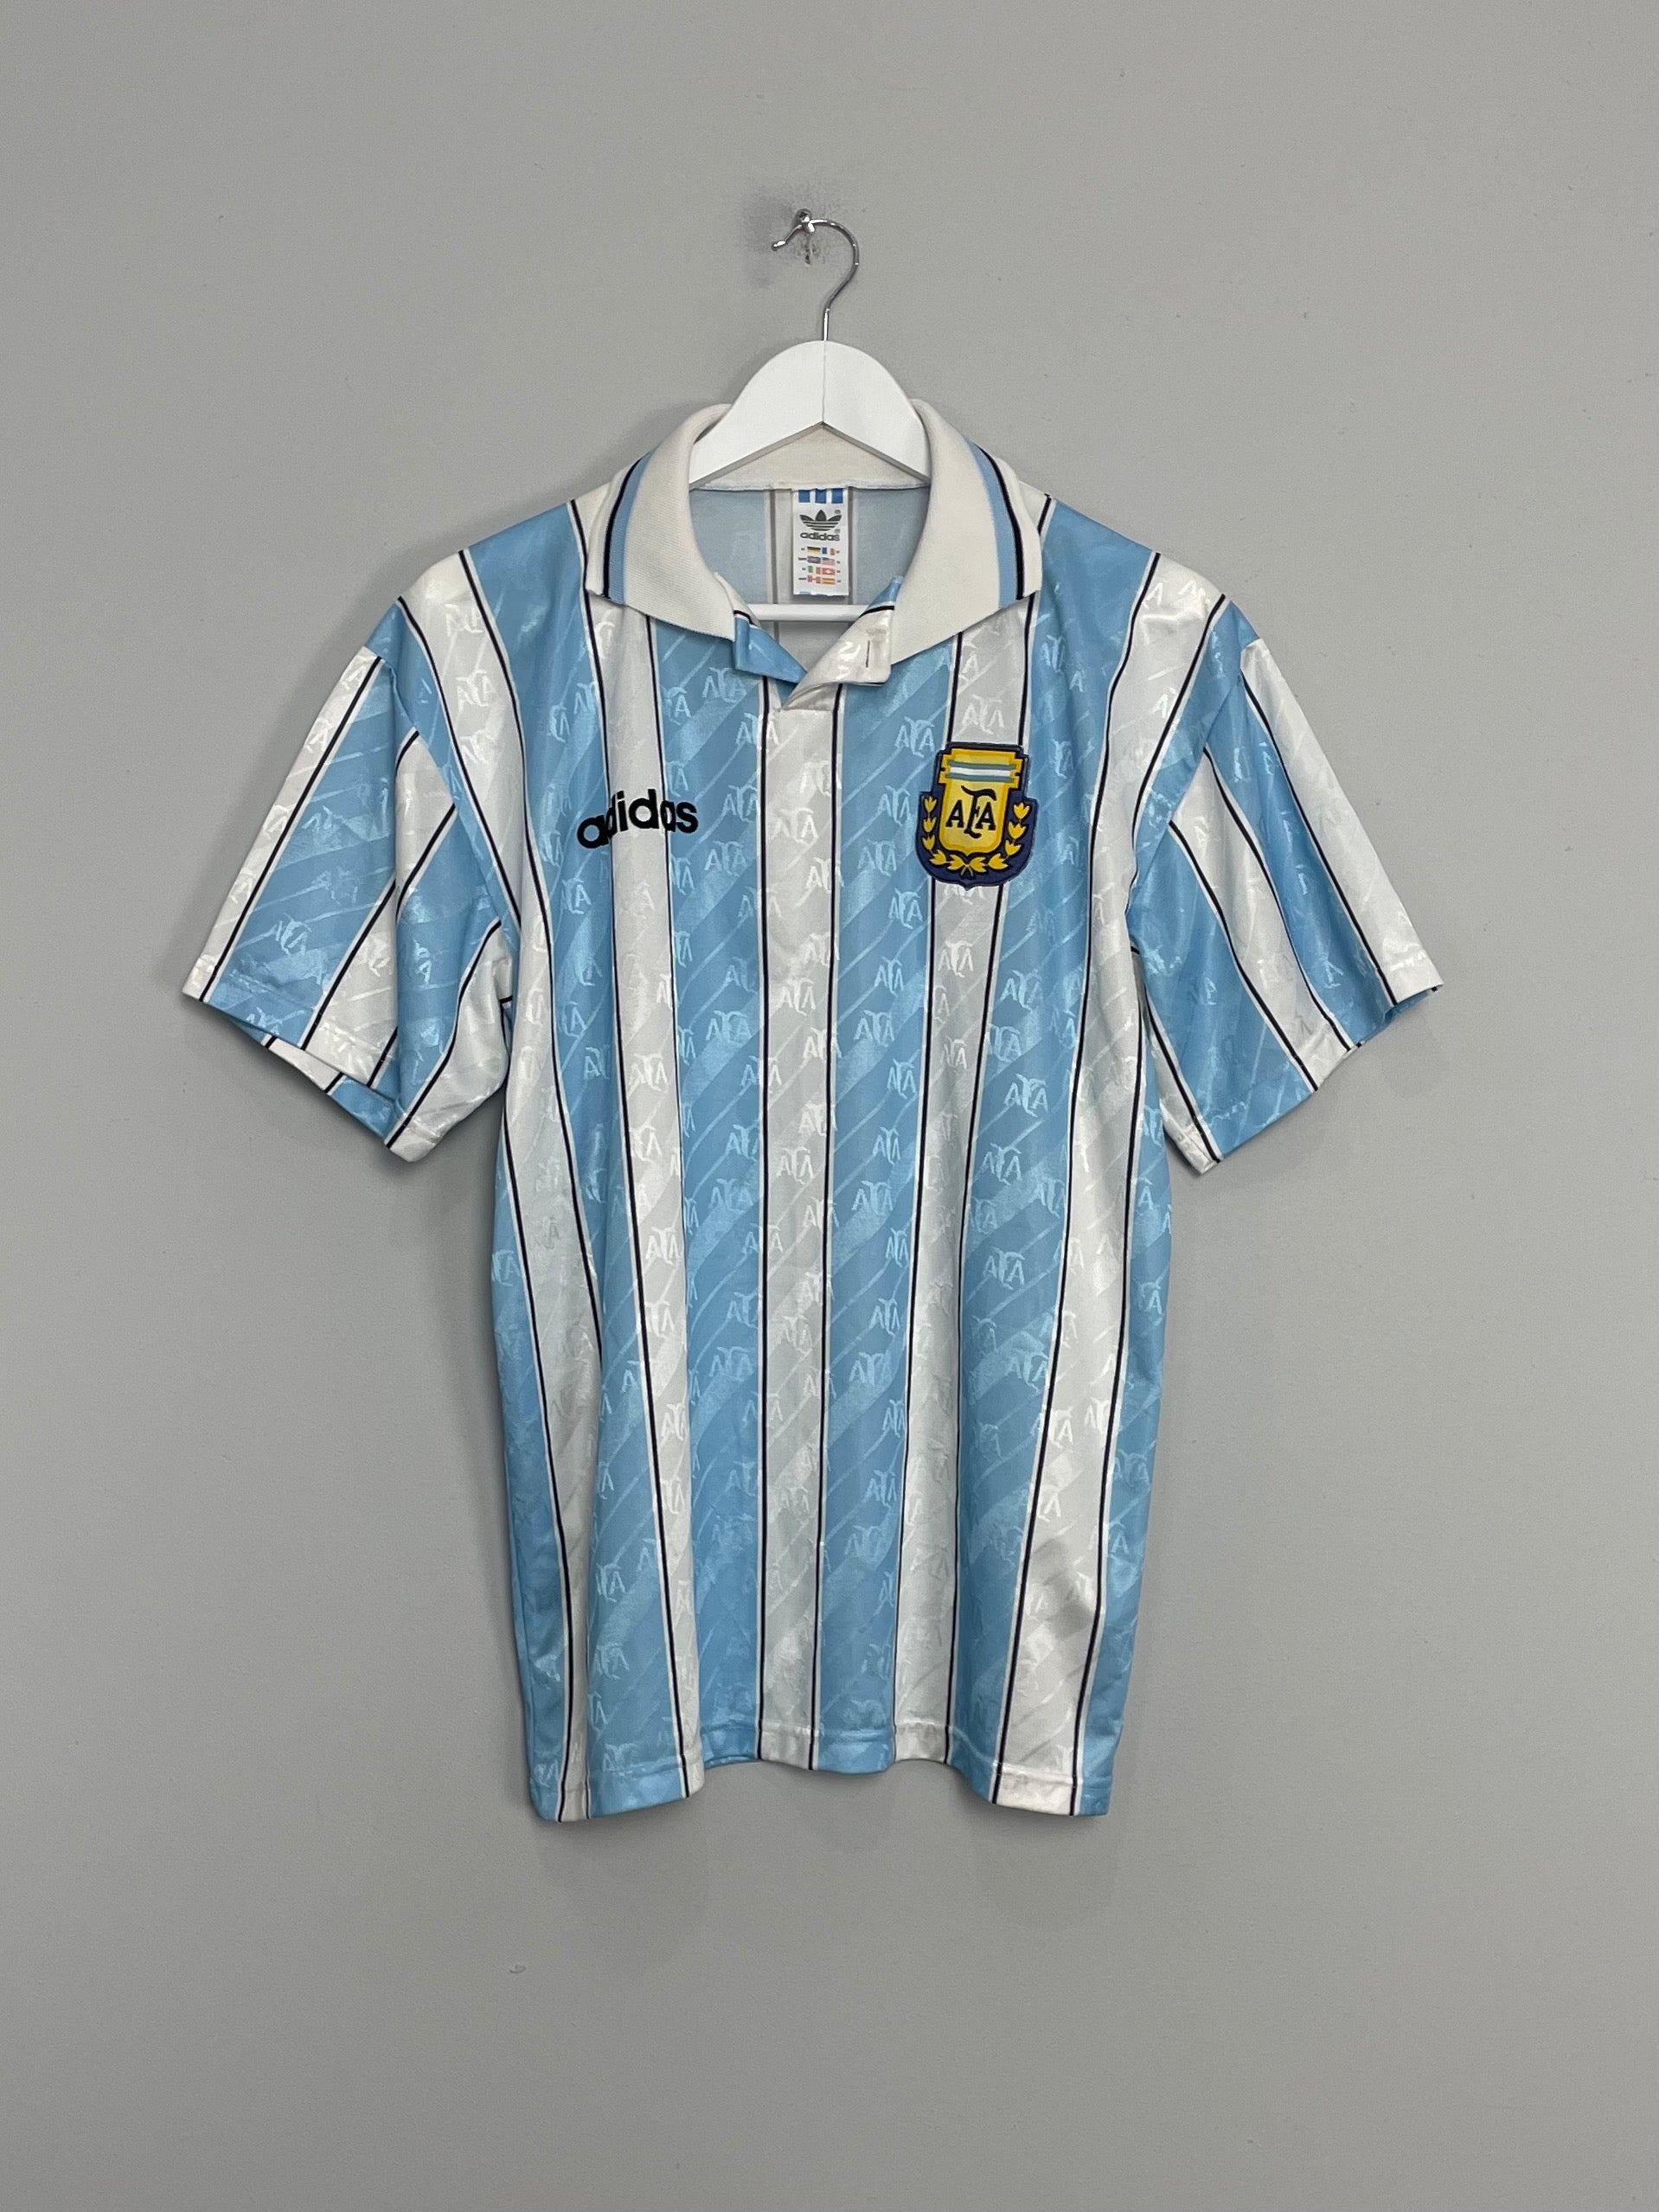 Image of the Argentina shirt from the 1996/97 season